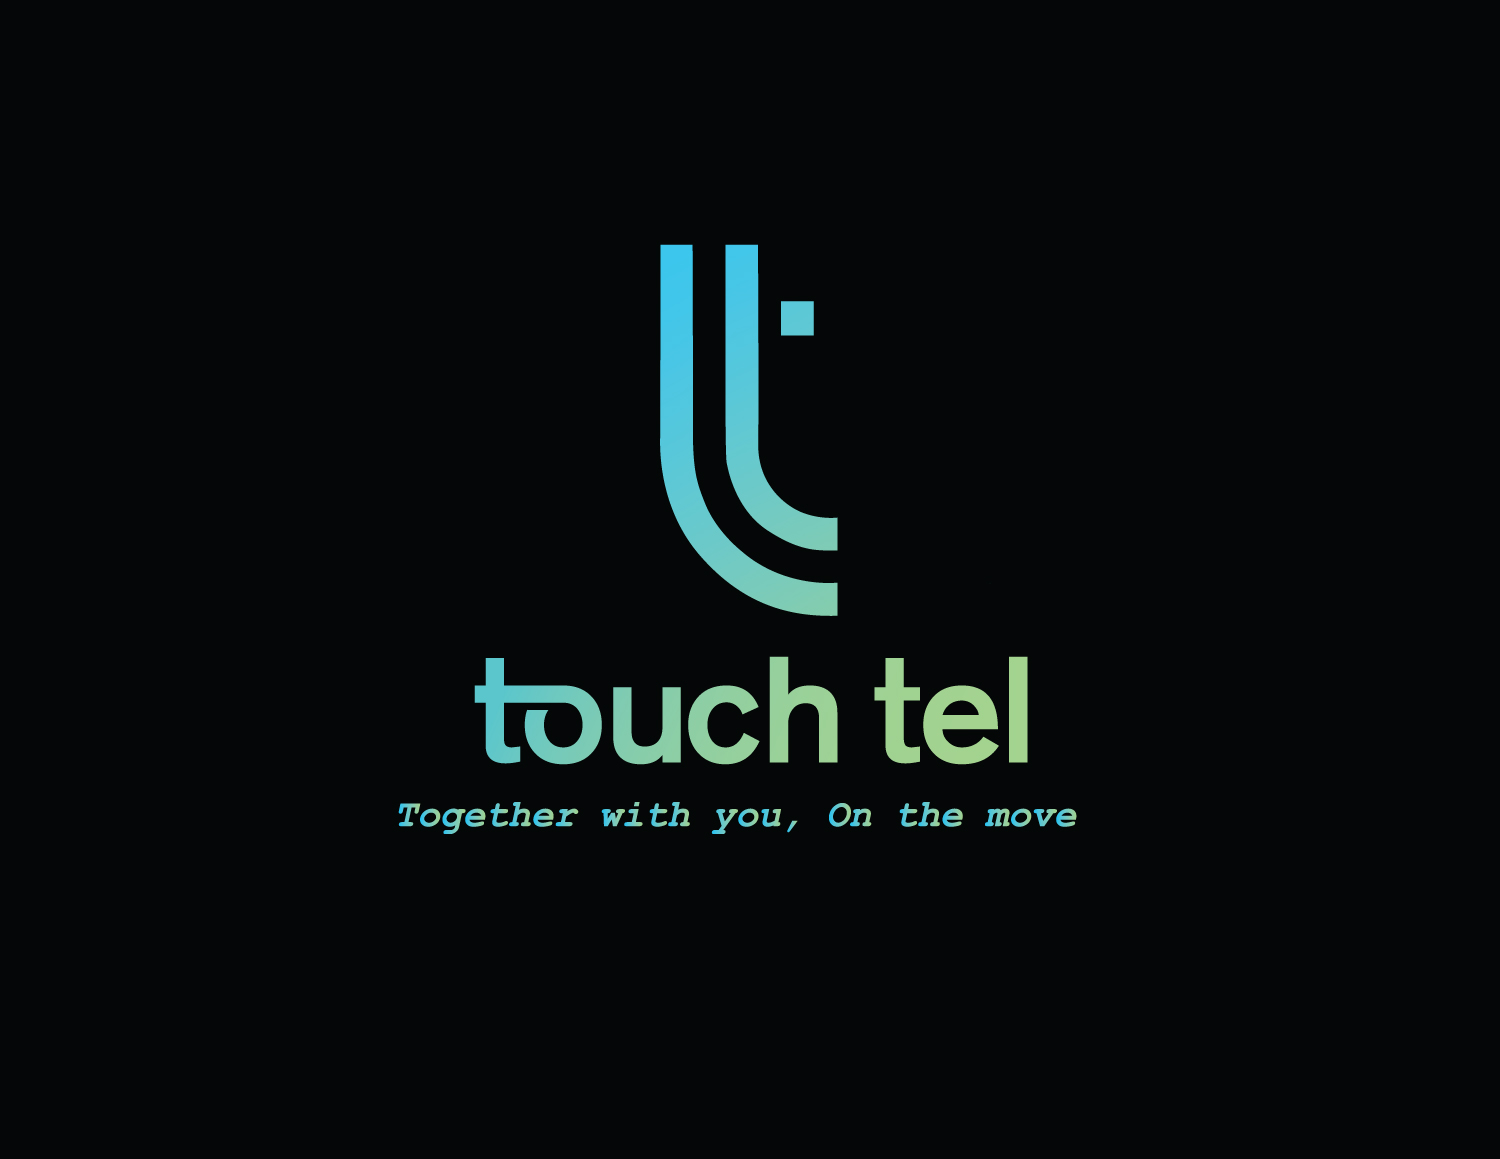 touch tel